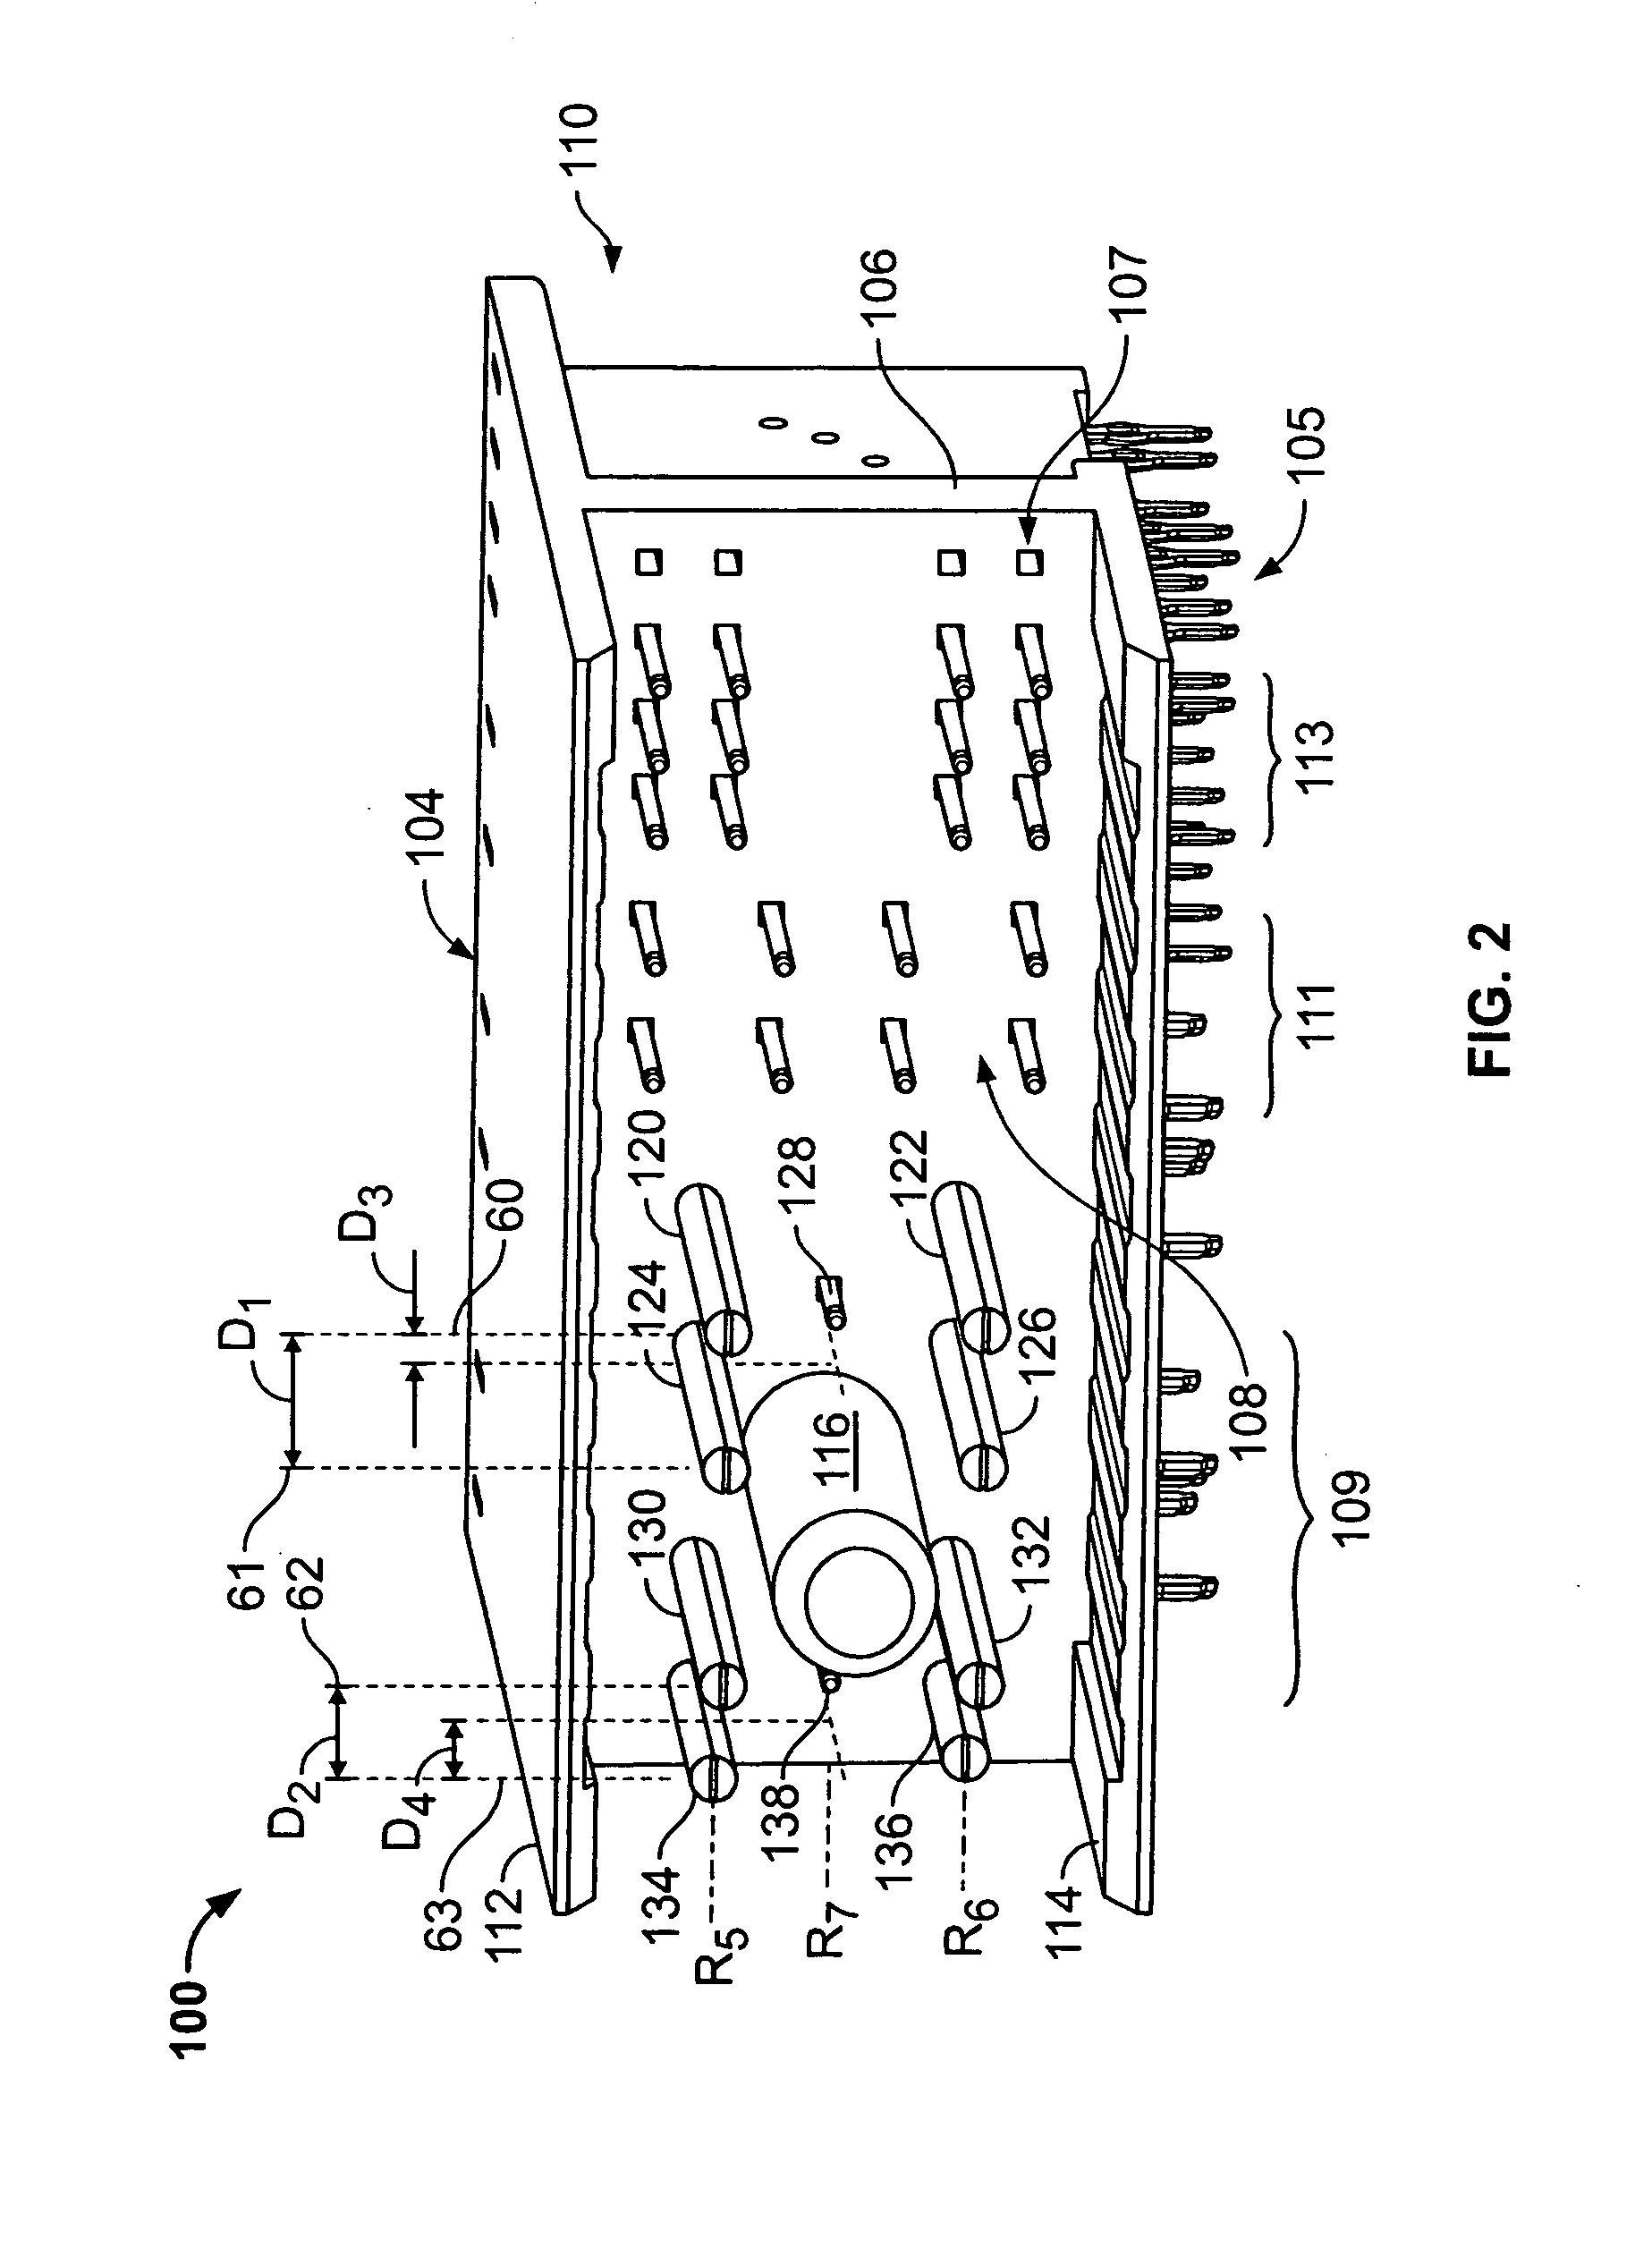 Modular connector assembly with adjustable distance between contact wafers